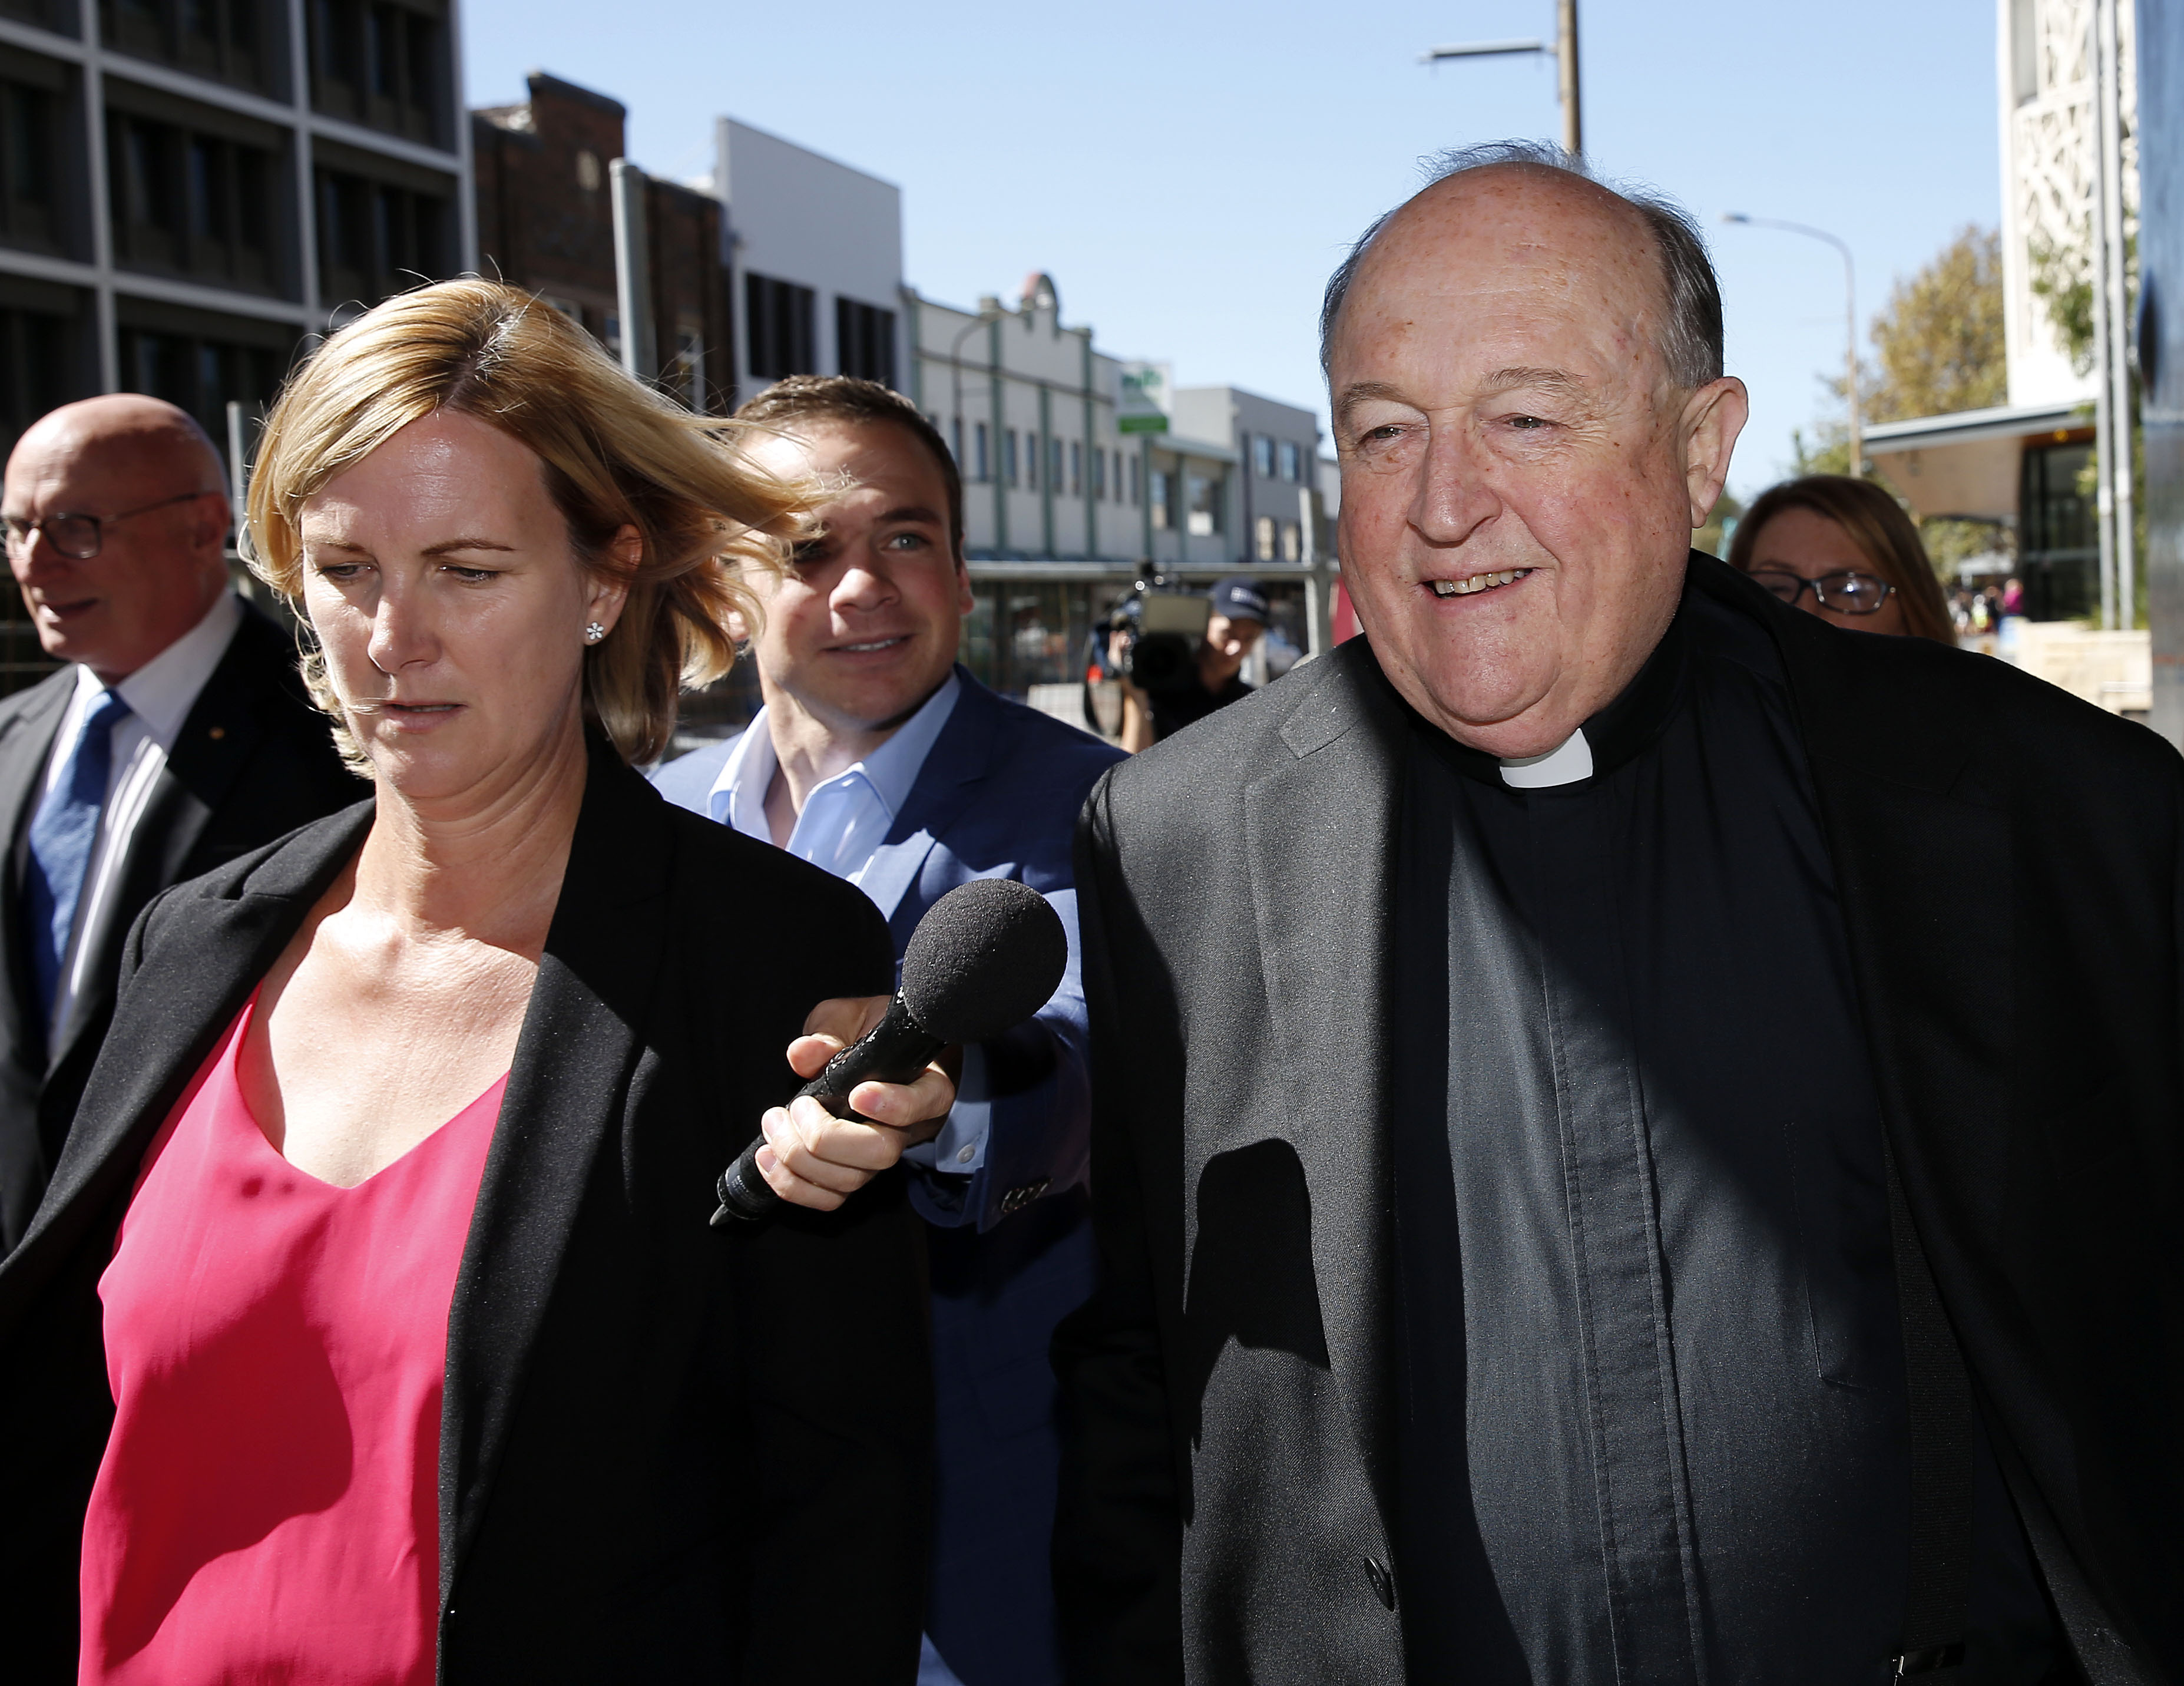 Australian Archbishop loses bid to have court case thrown out